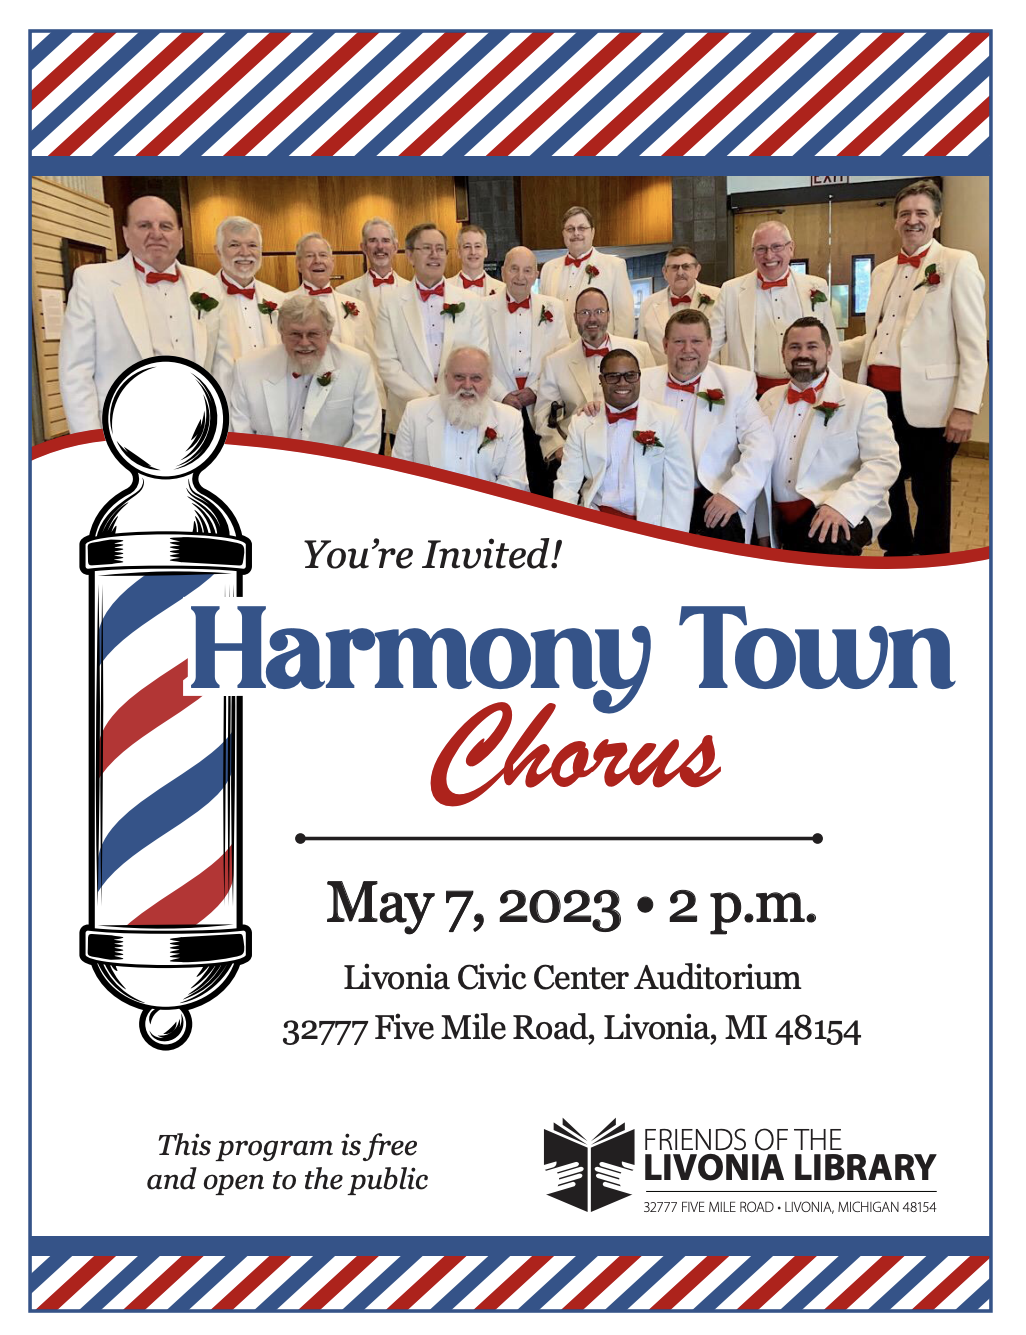 Friends of the Livonia Library Concert